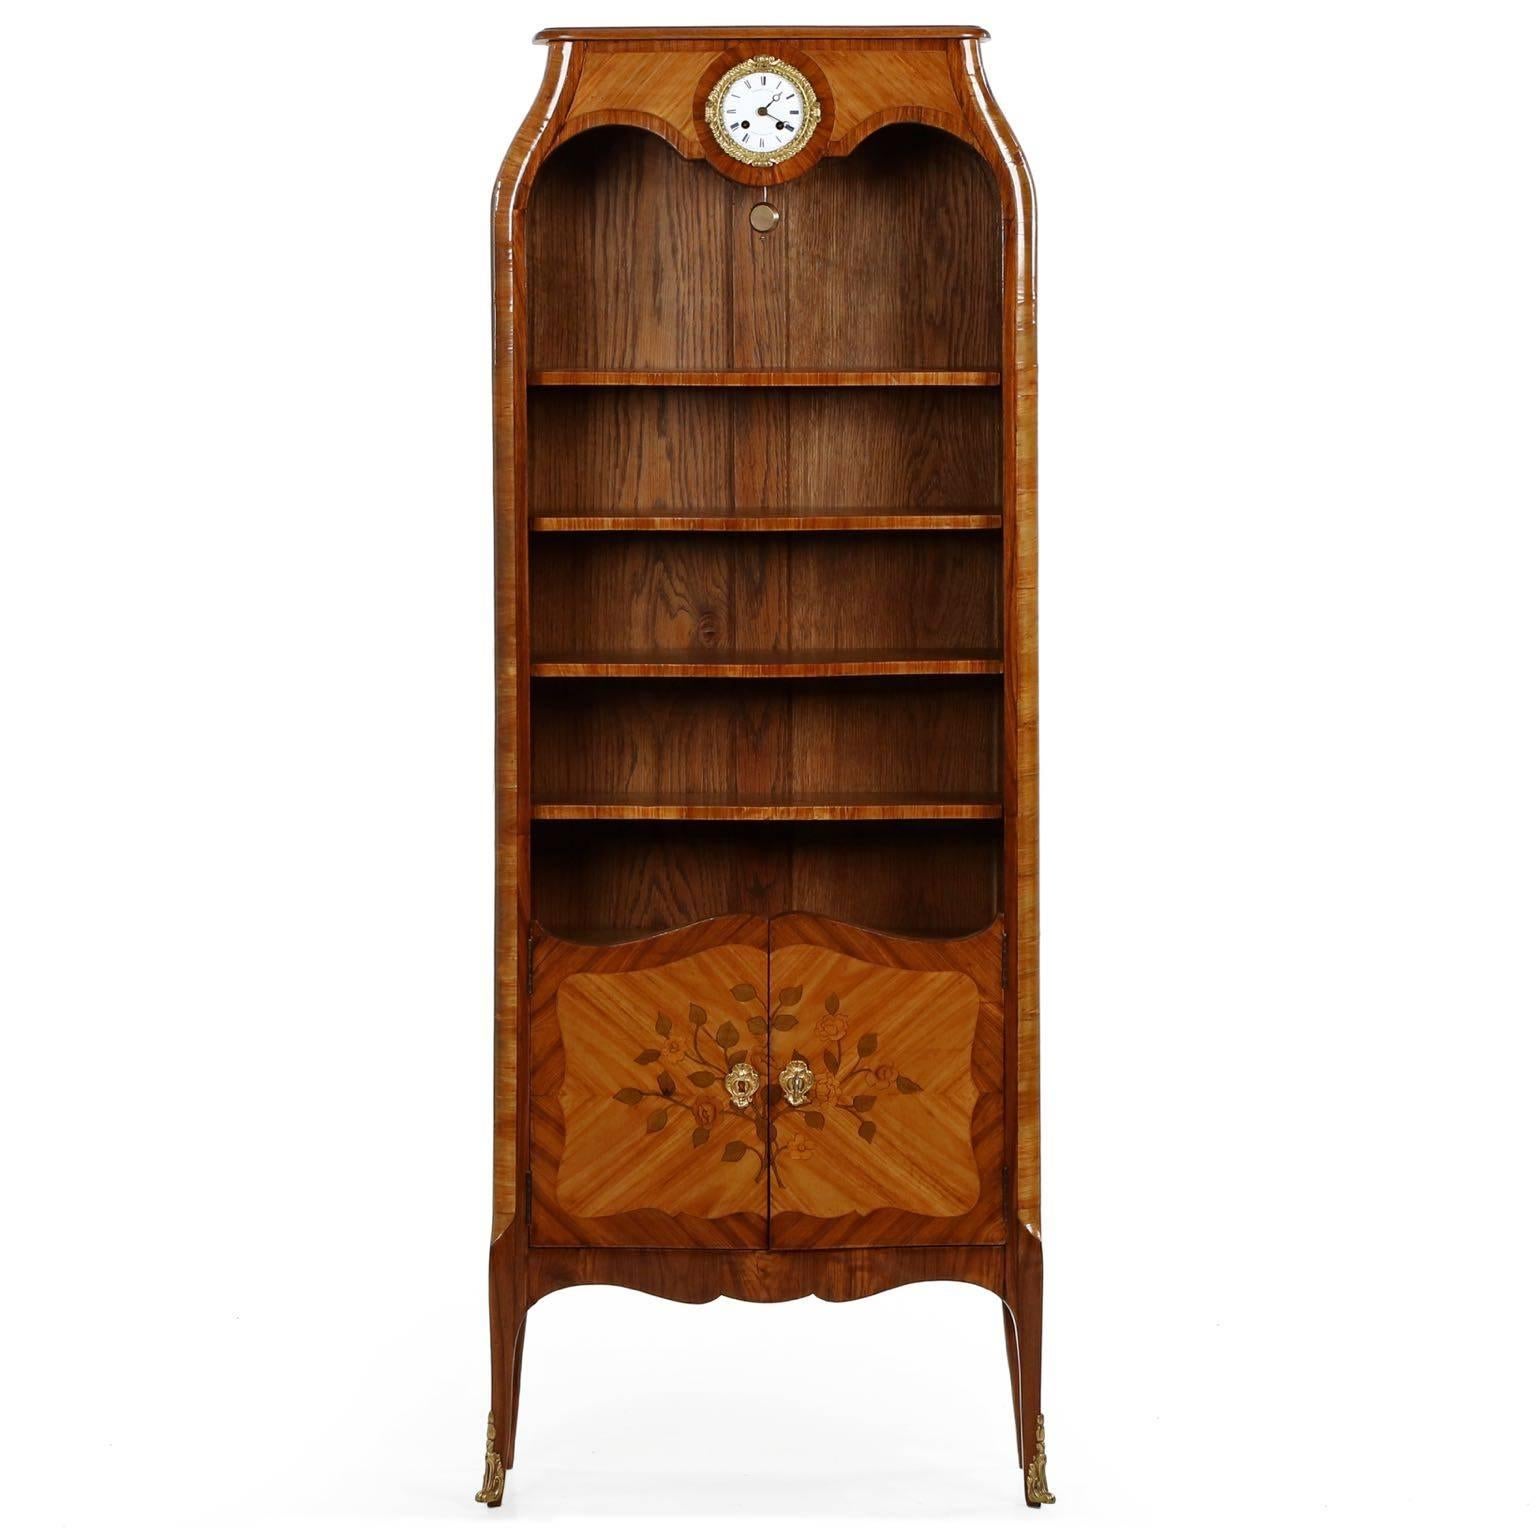 An intricately veneered case with a lovely form and dimension, this very fine bookcase is crafted in the Louis XV taste during the height of the Belle Epoque period at the turn of the century. With only 7 1/2” in overall depth, the case barely